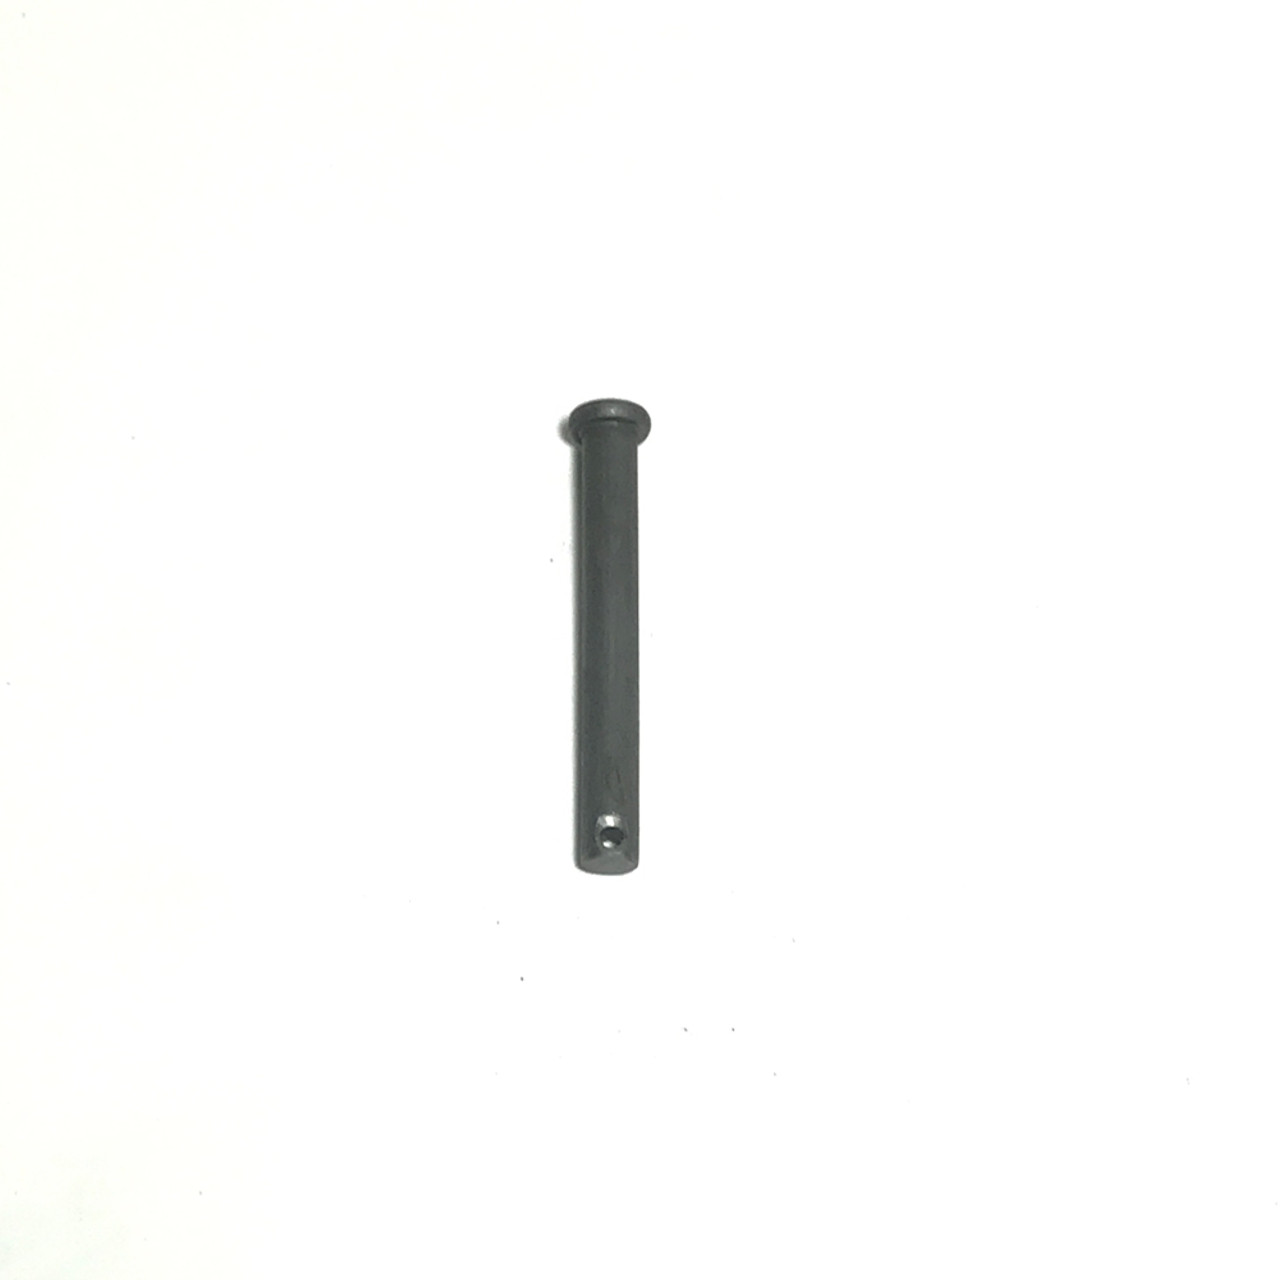 CLEVIS PIN 1/4 X 2